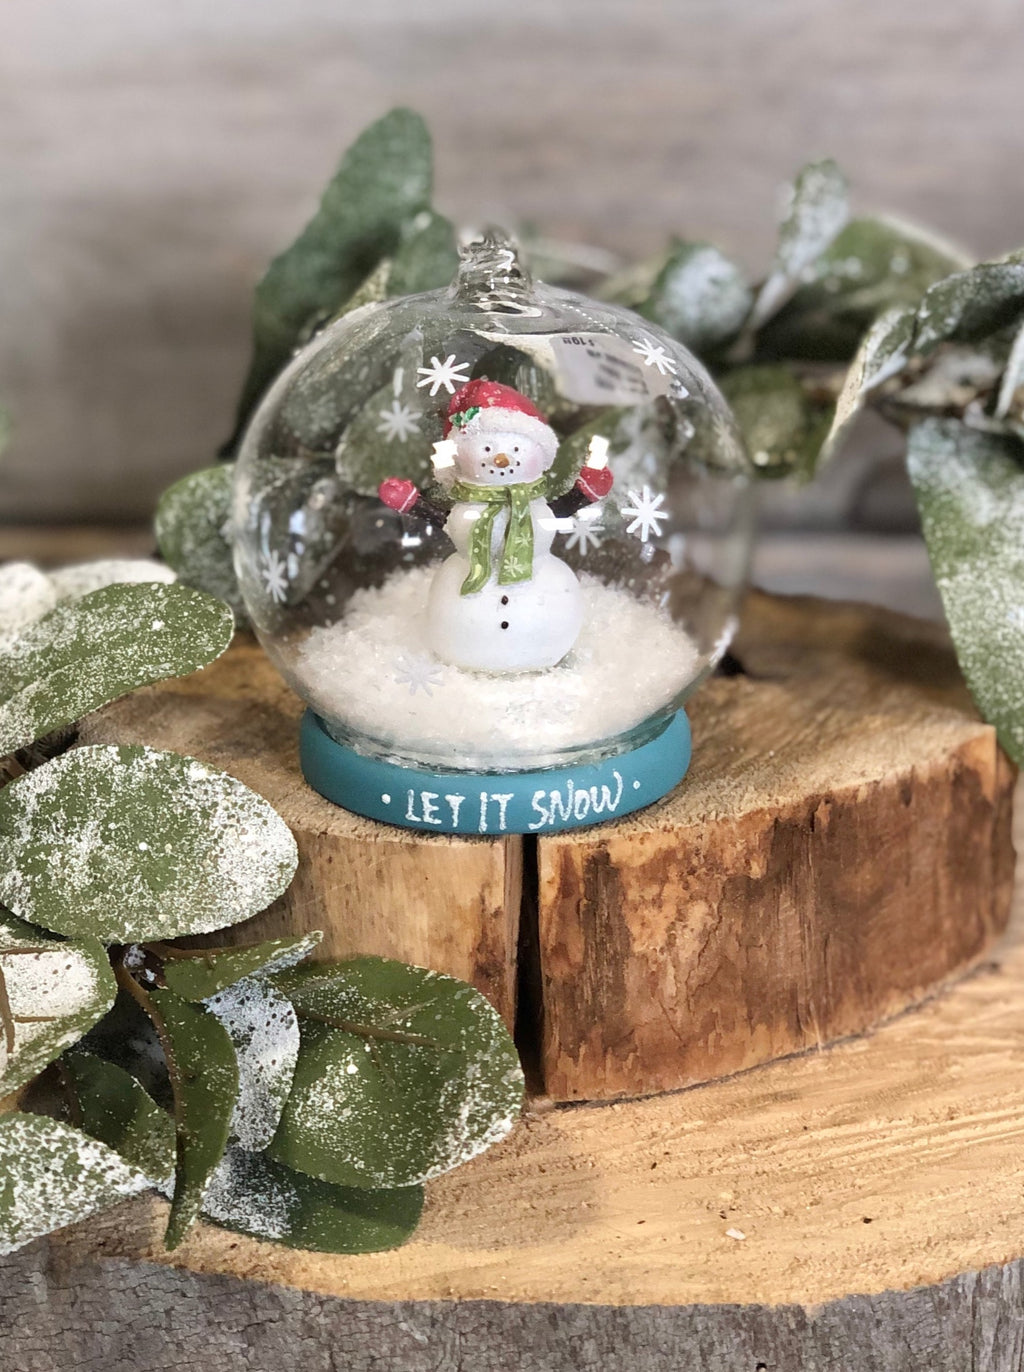 Resin & Glass Snow Globe Ornament with Snowman & LED Lights